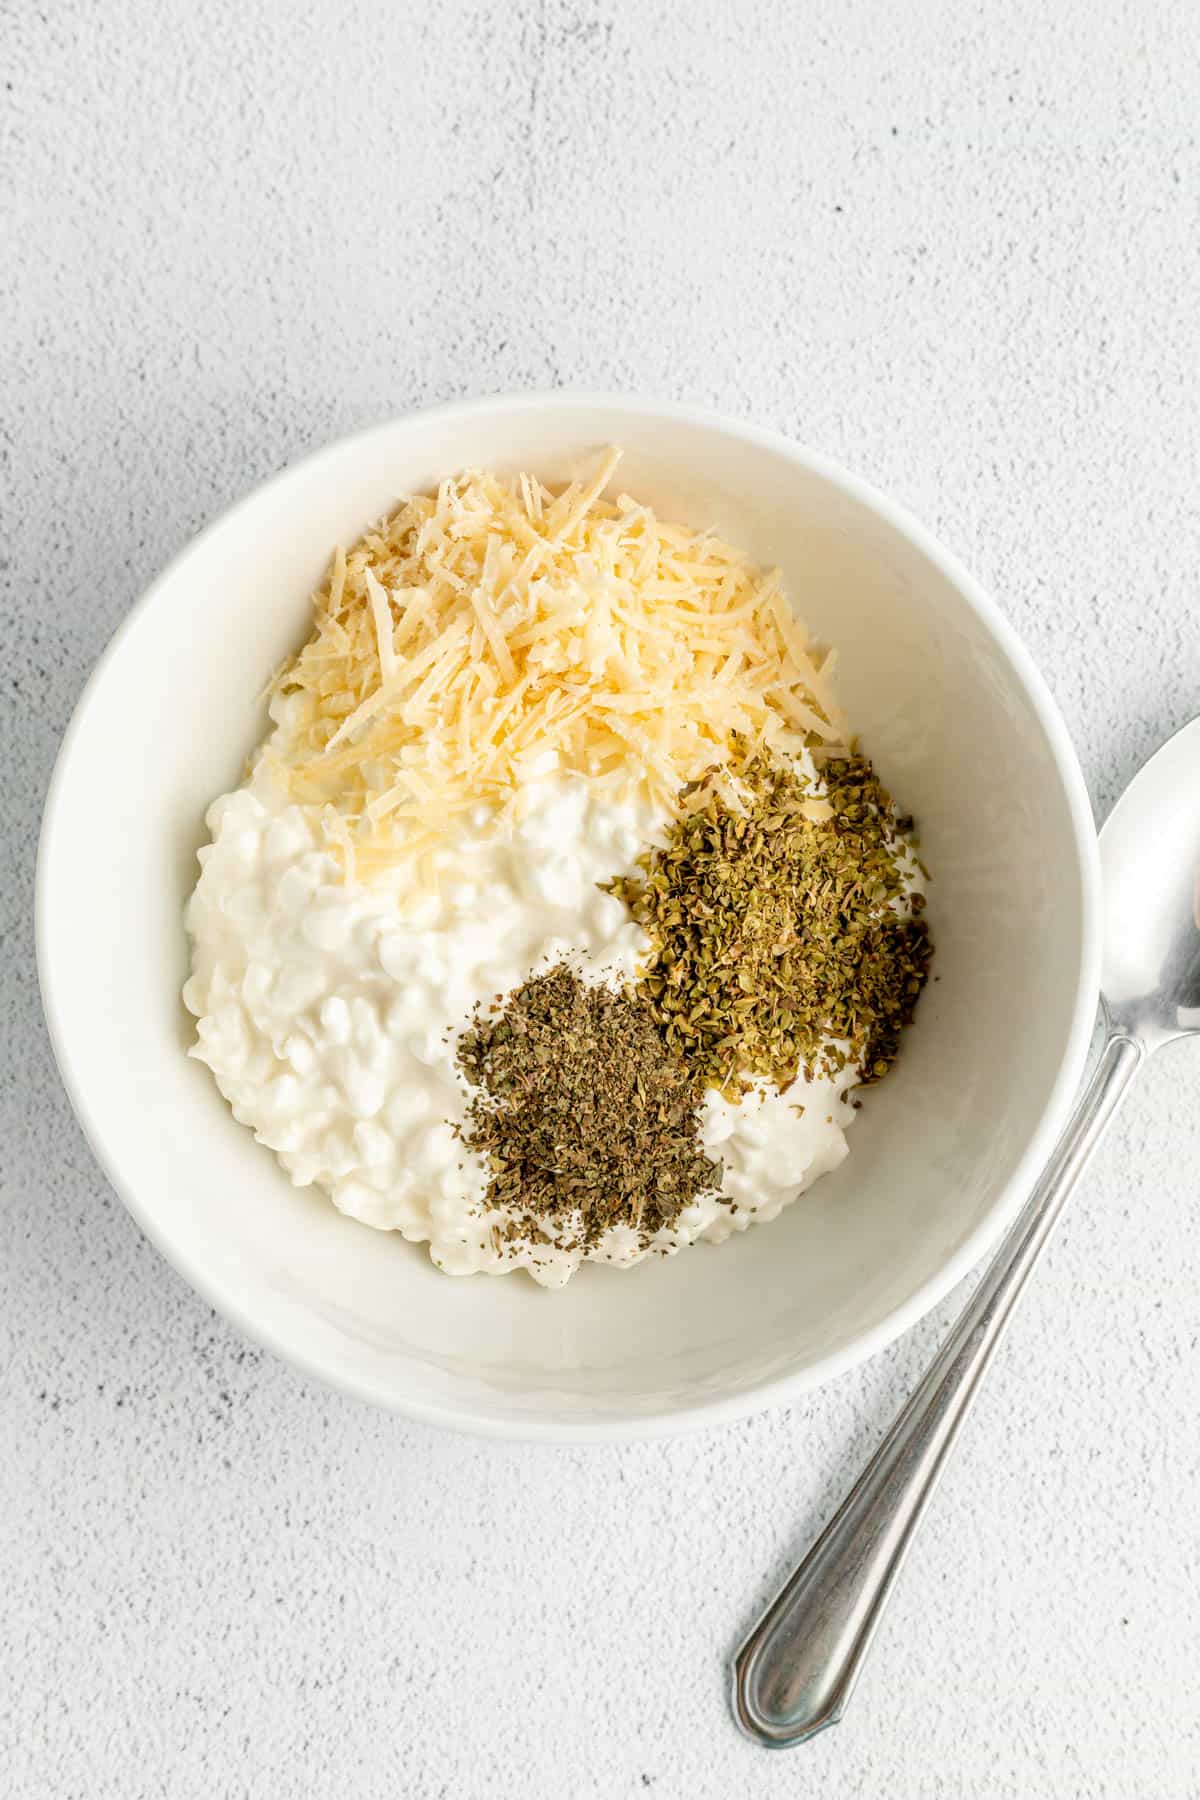 Cottage cheese, grated parmesan cheese, and seasonings in a white bowl next to a spoon.